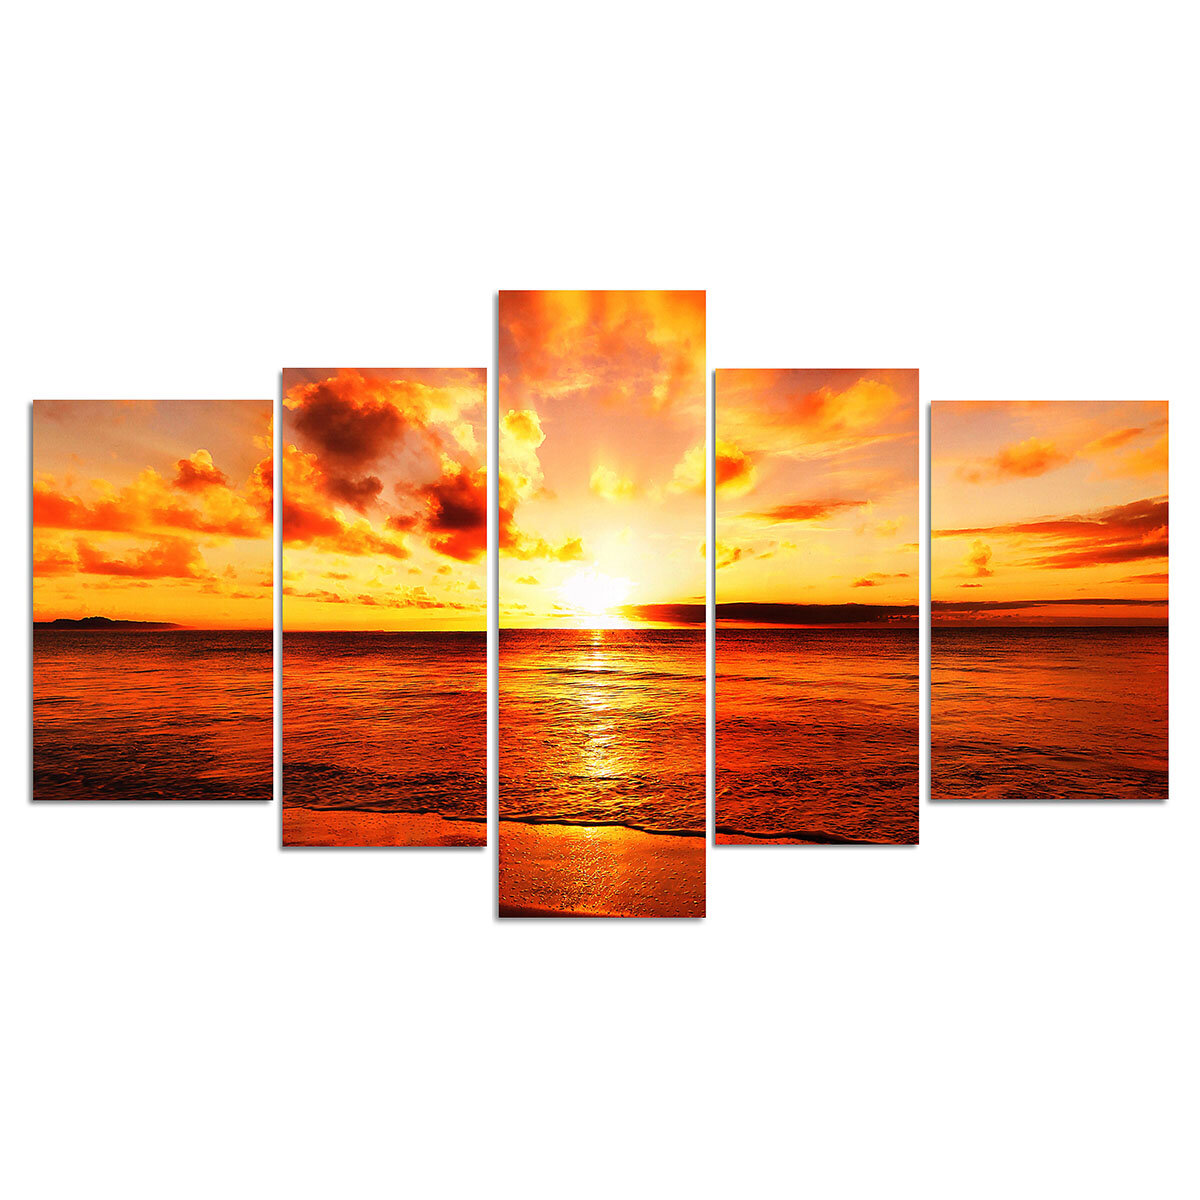 

5 Pcs Wall Decorative Painting Huge Modern Abstract Wall Decor Sea Art Pictures Canvas Prints Home Office Hotel Decorati